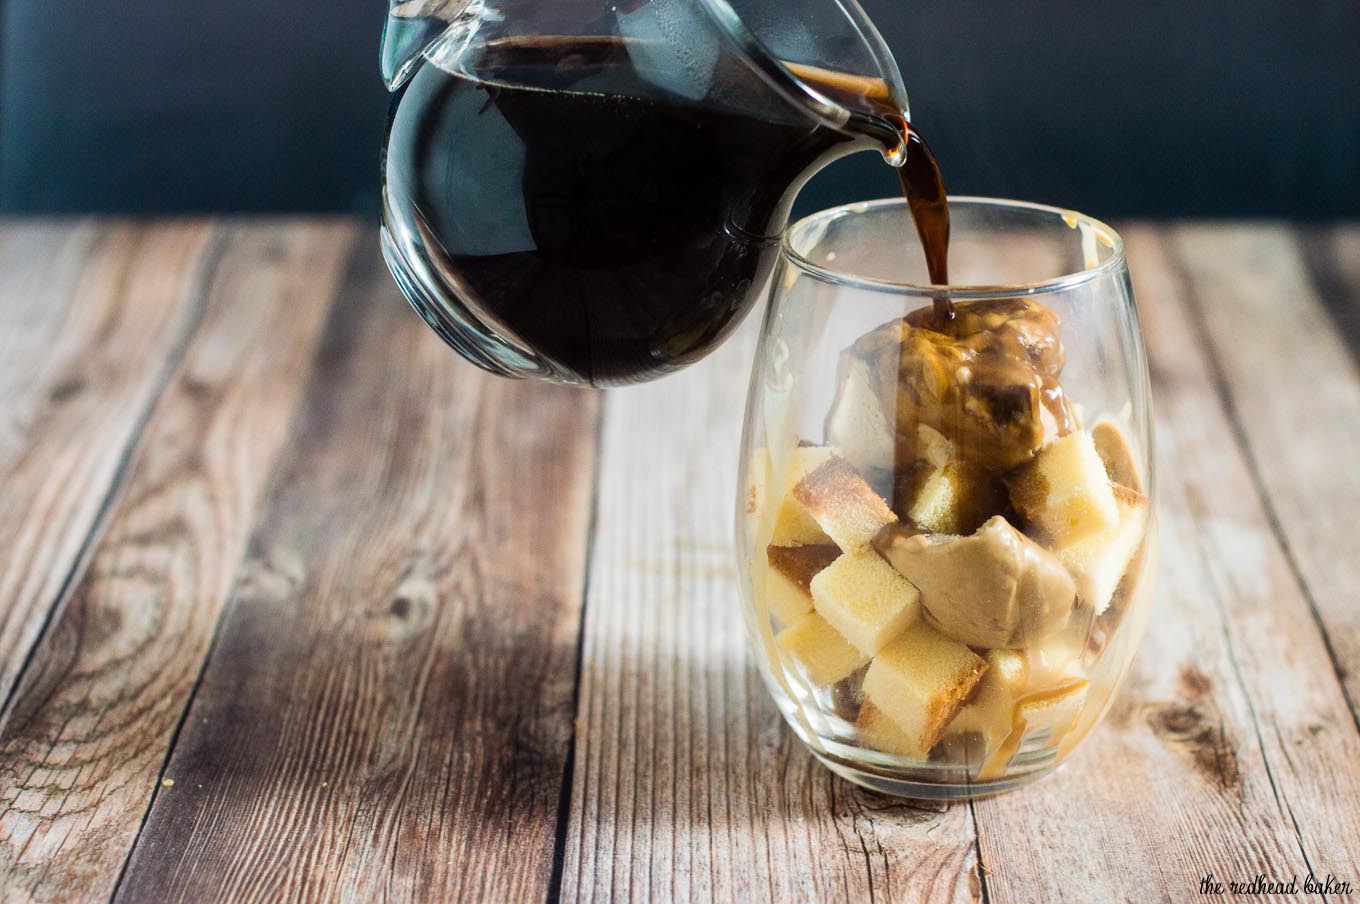 Salted Caramel Affogato Parfaits combine gelato, coffee and pound cake for a grown-up dessert with lots of different flavors and textures, perfect for any celebration.